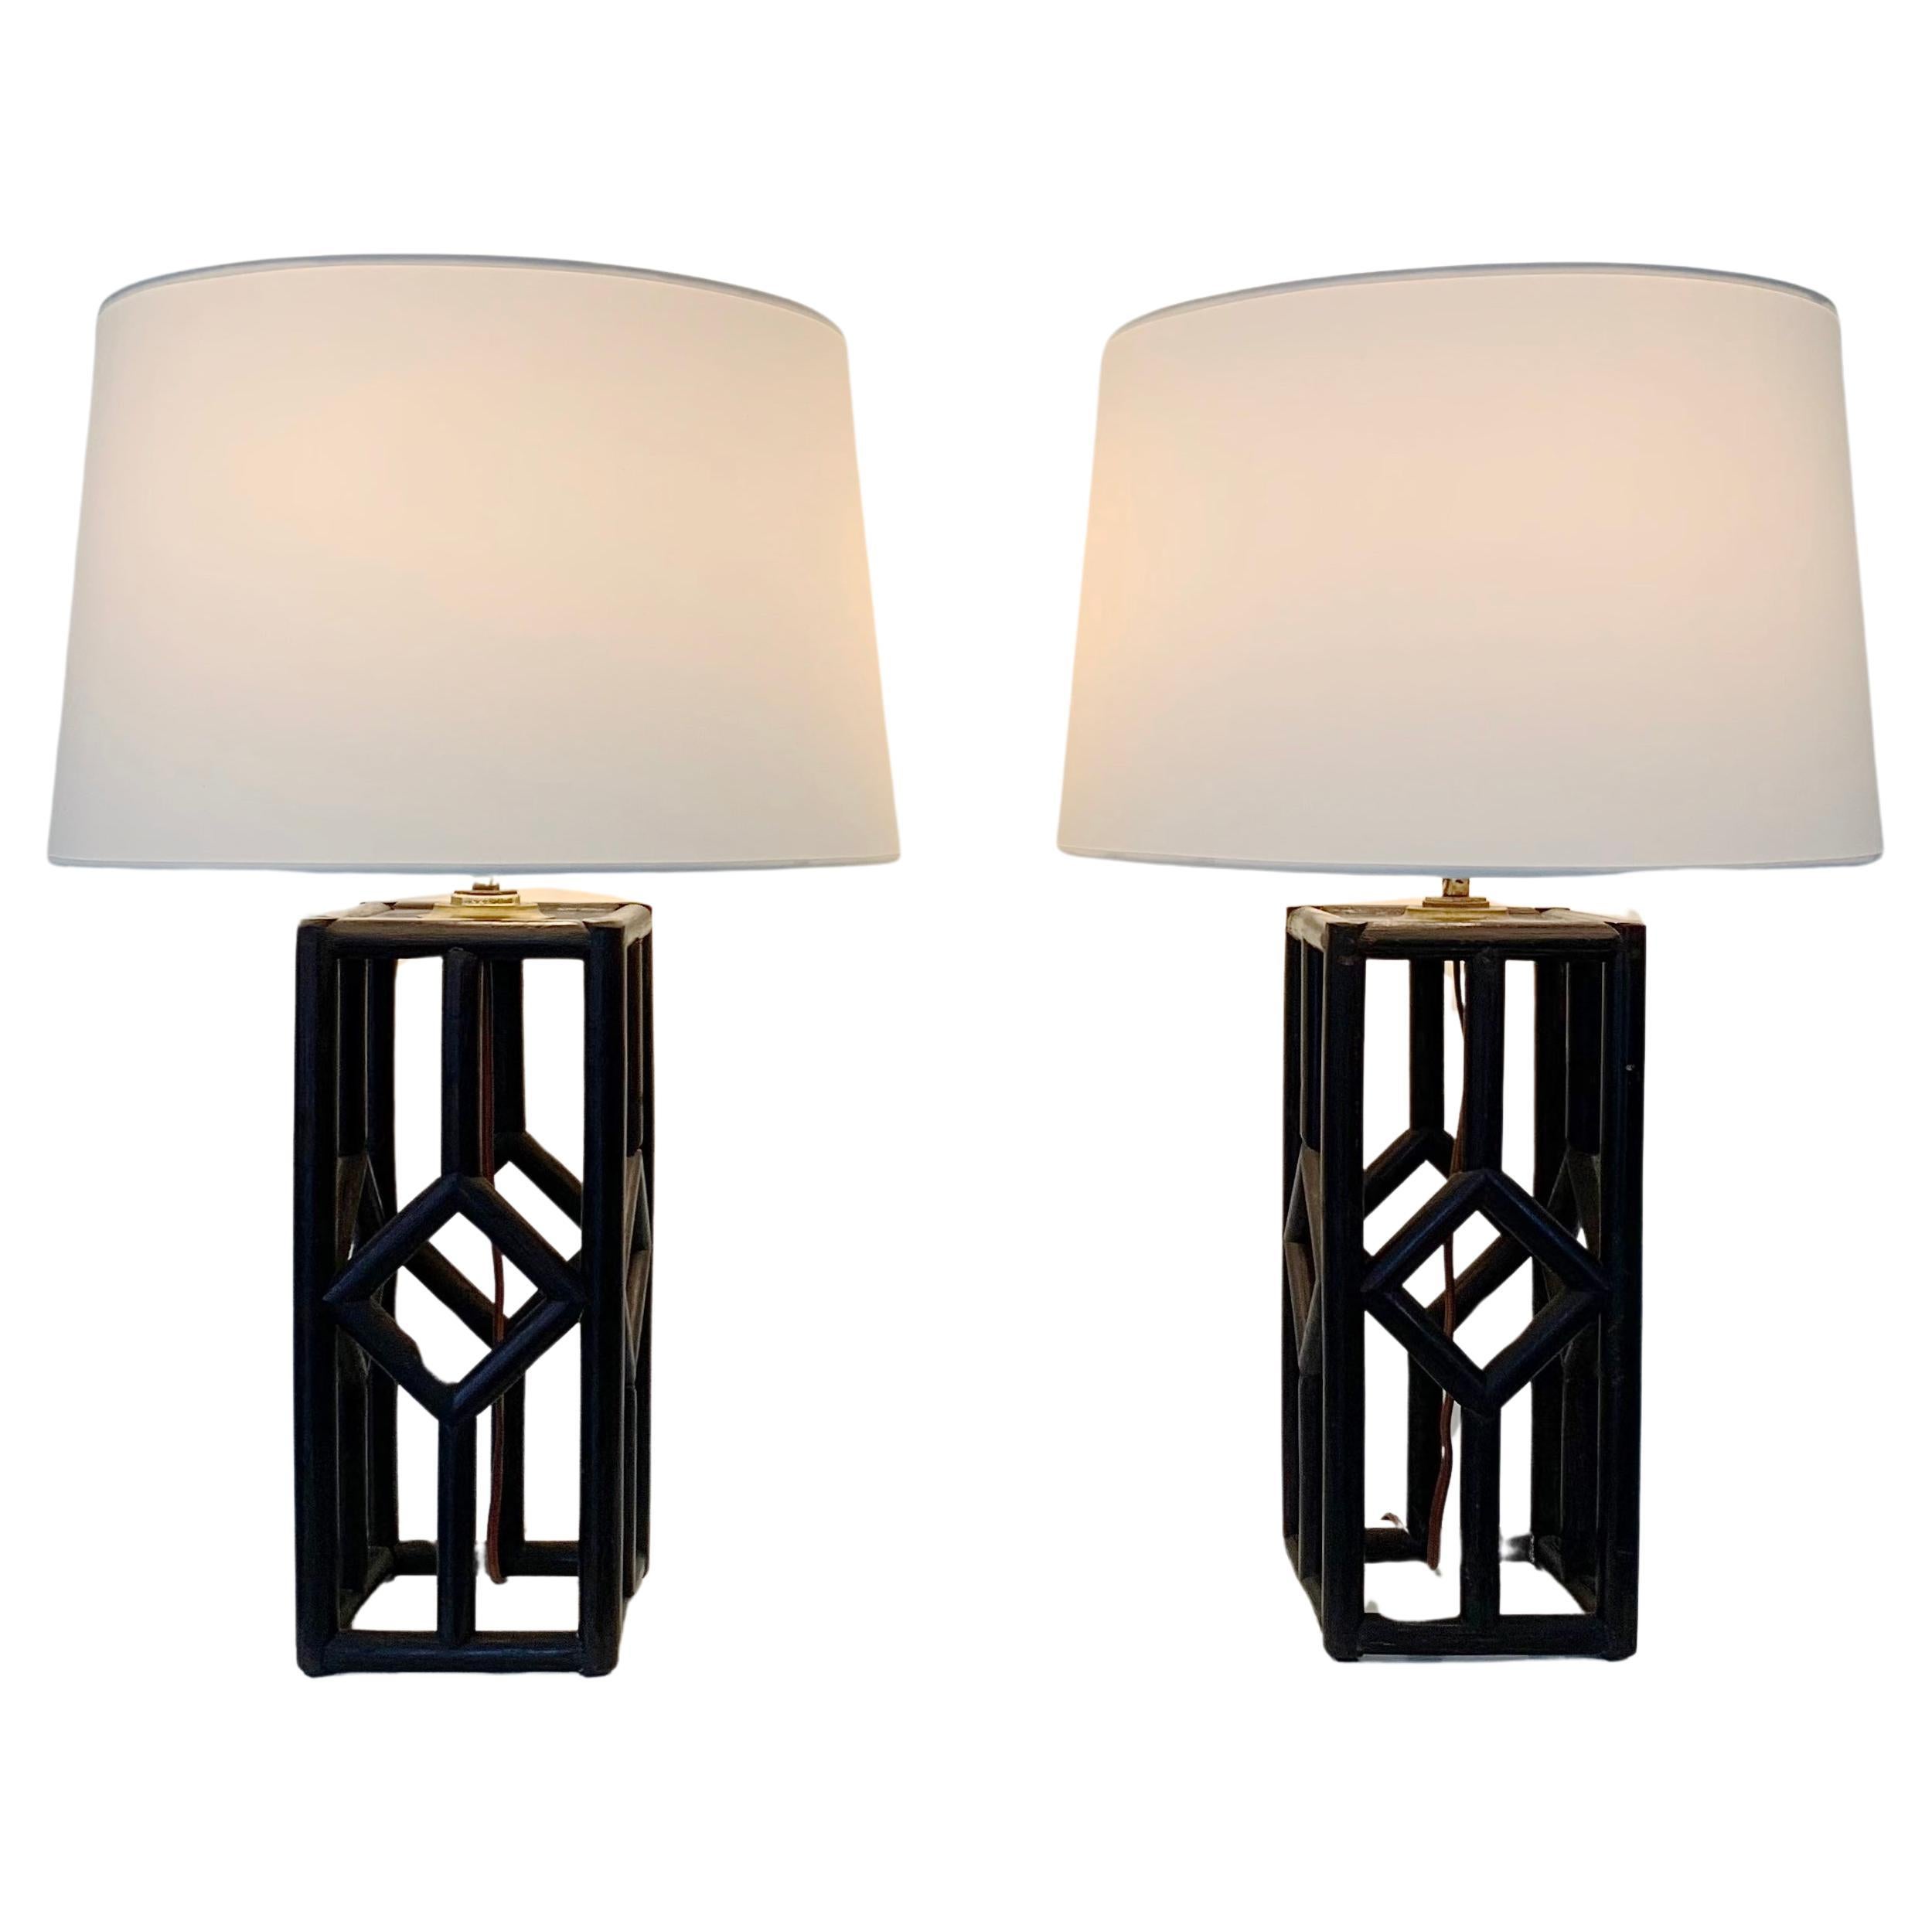 Mid-Century Pair of Bamboo Table Lamps, circa 1970, Italy.